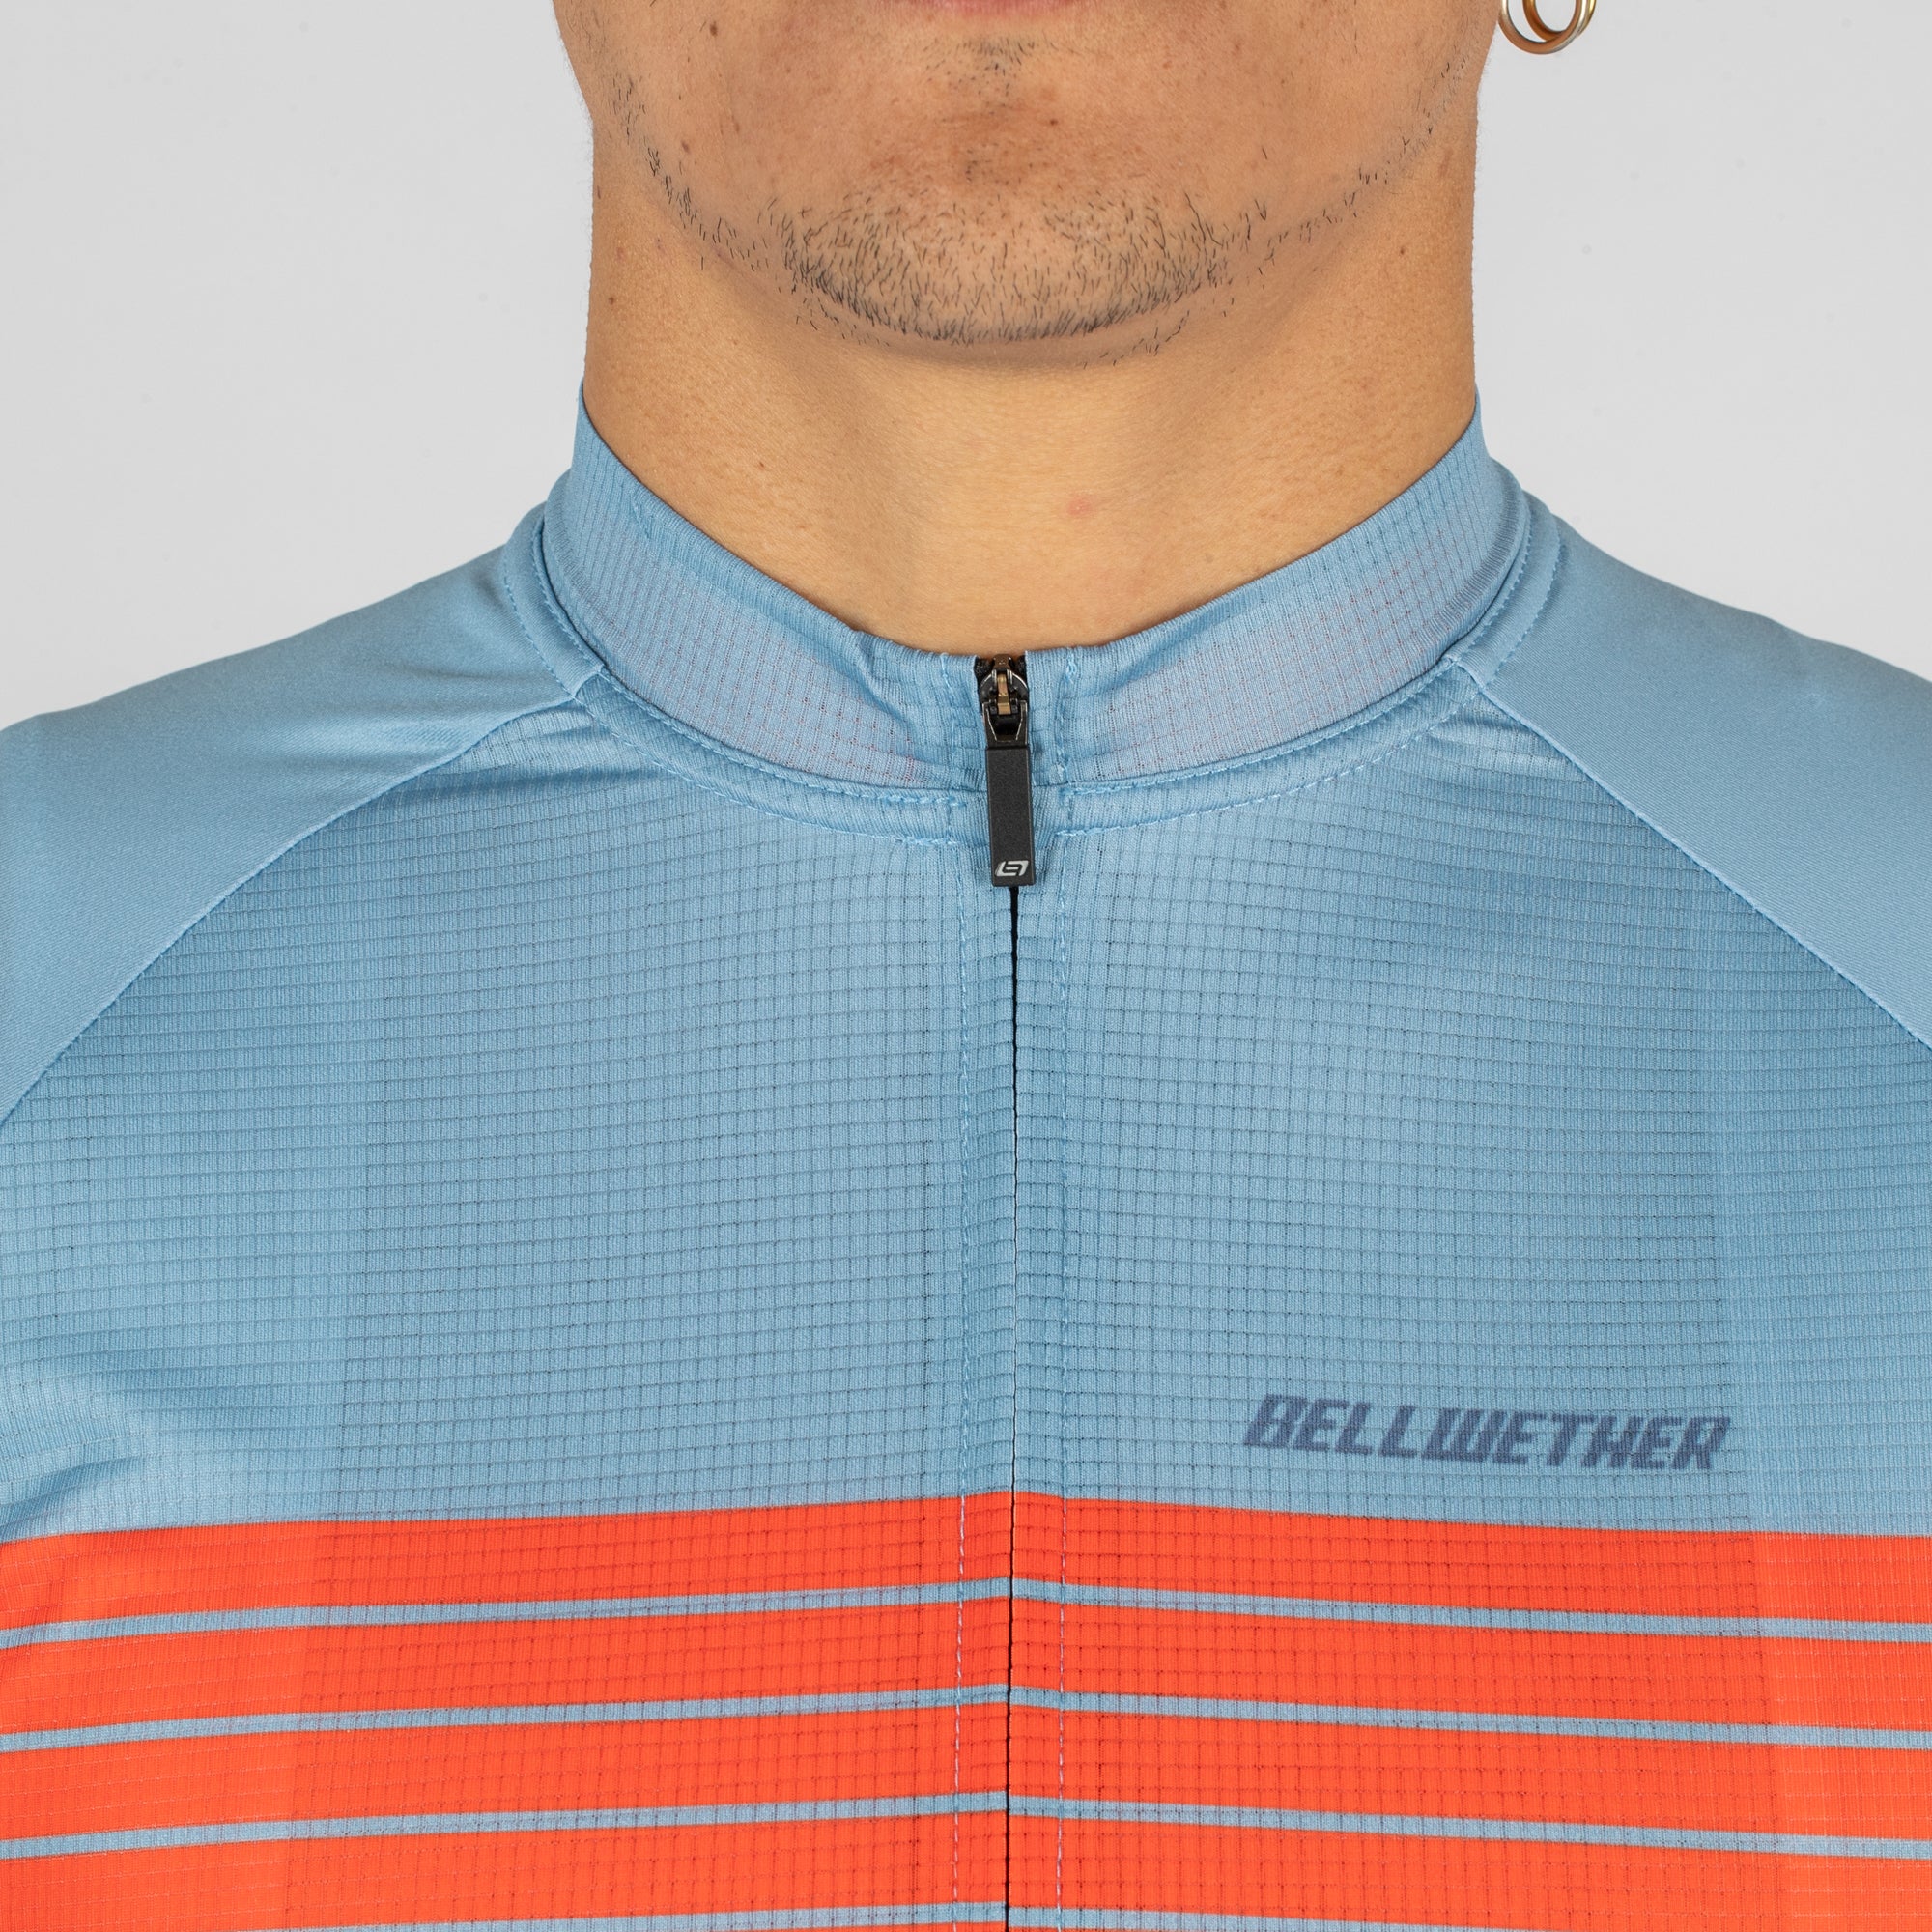 Sol-Air Pro UPF 40+ Jersey | Bellwether